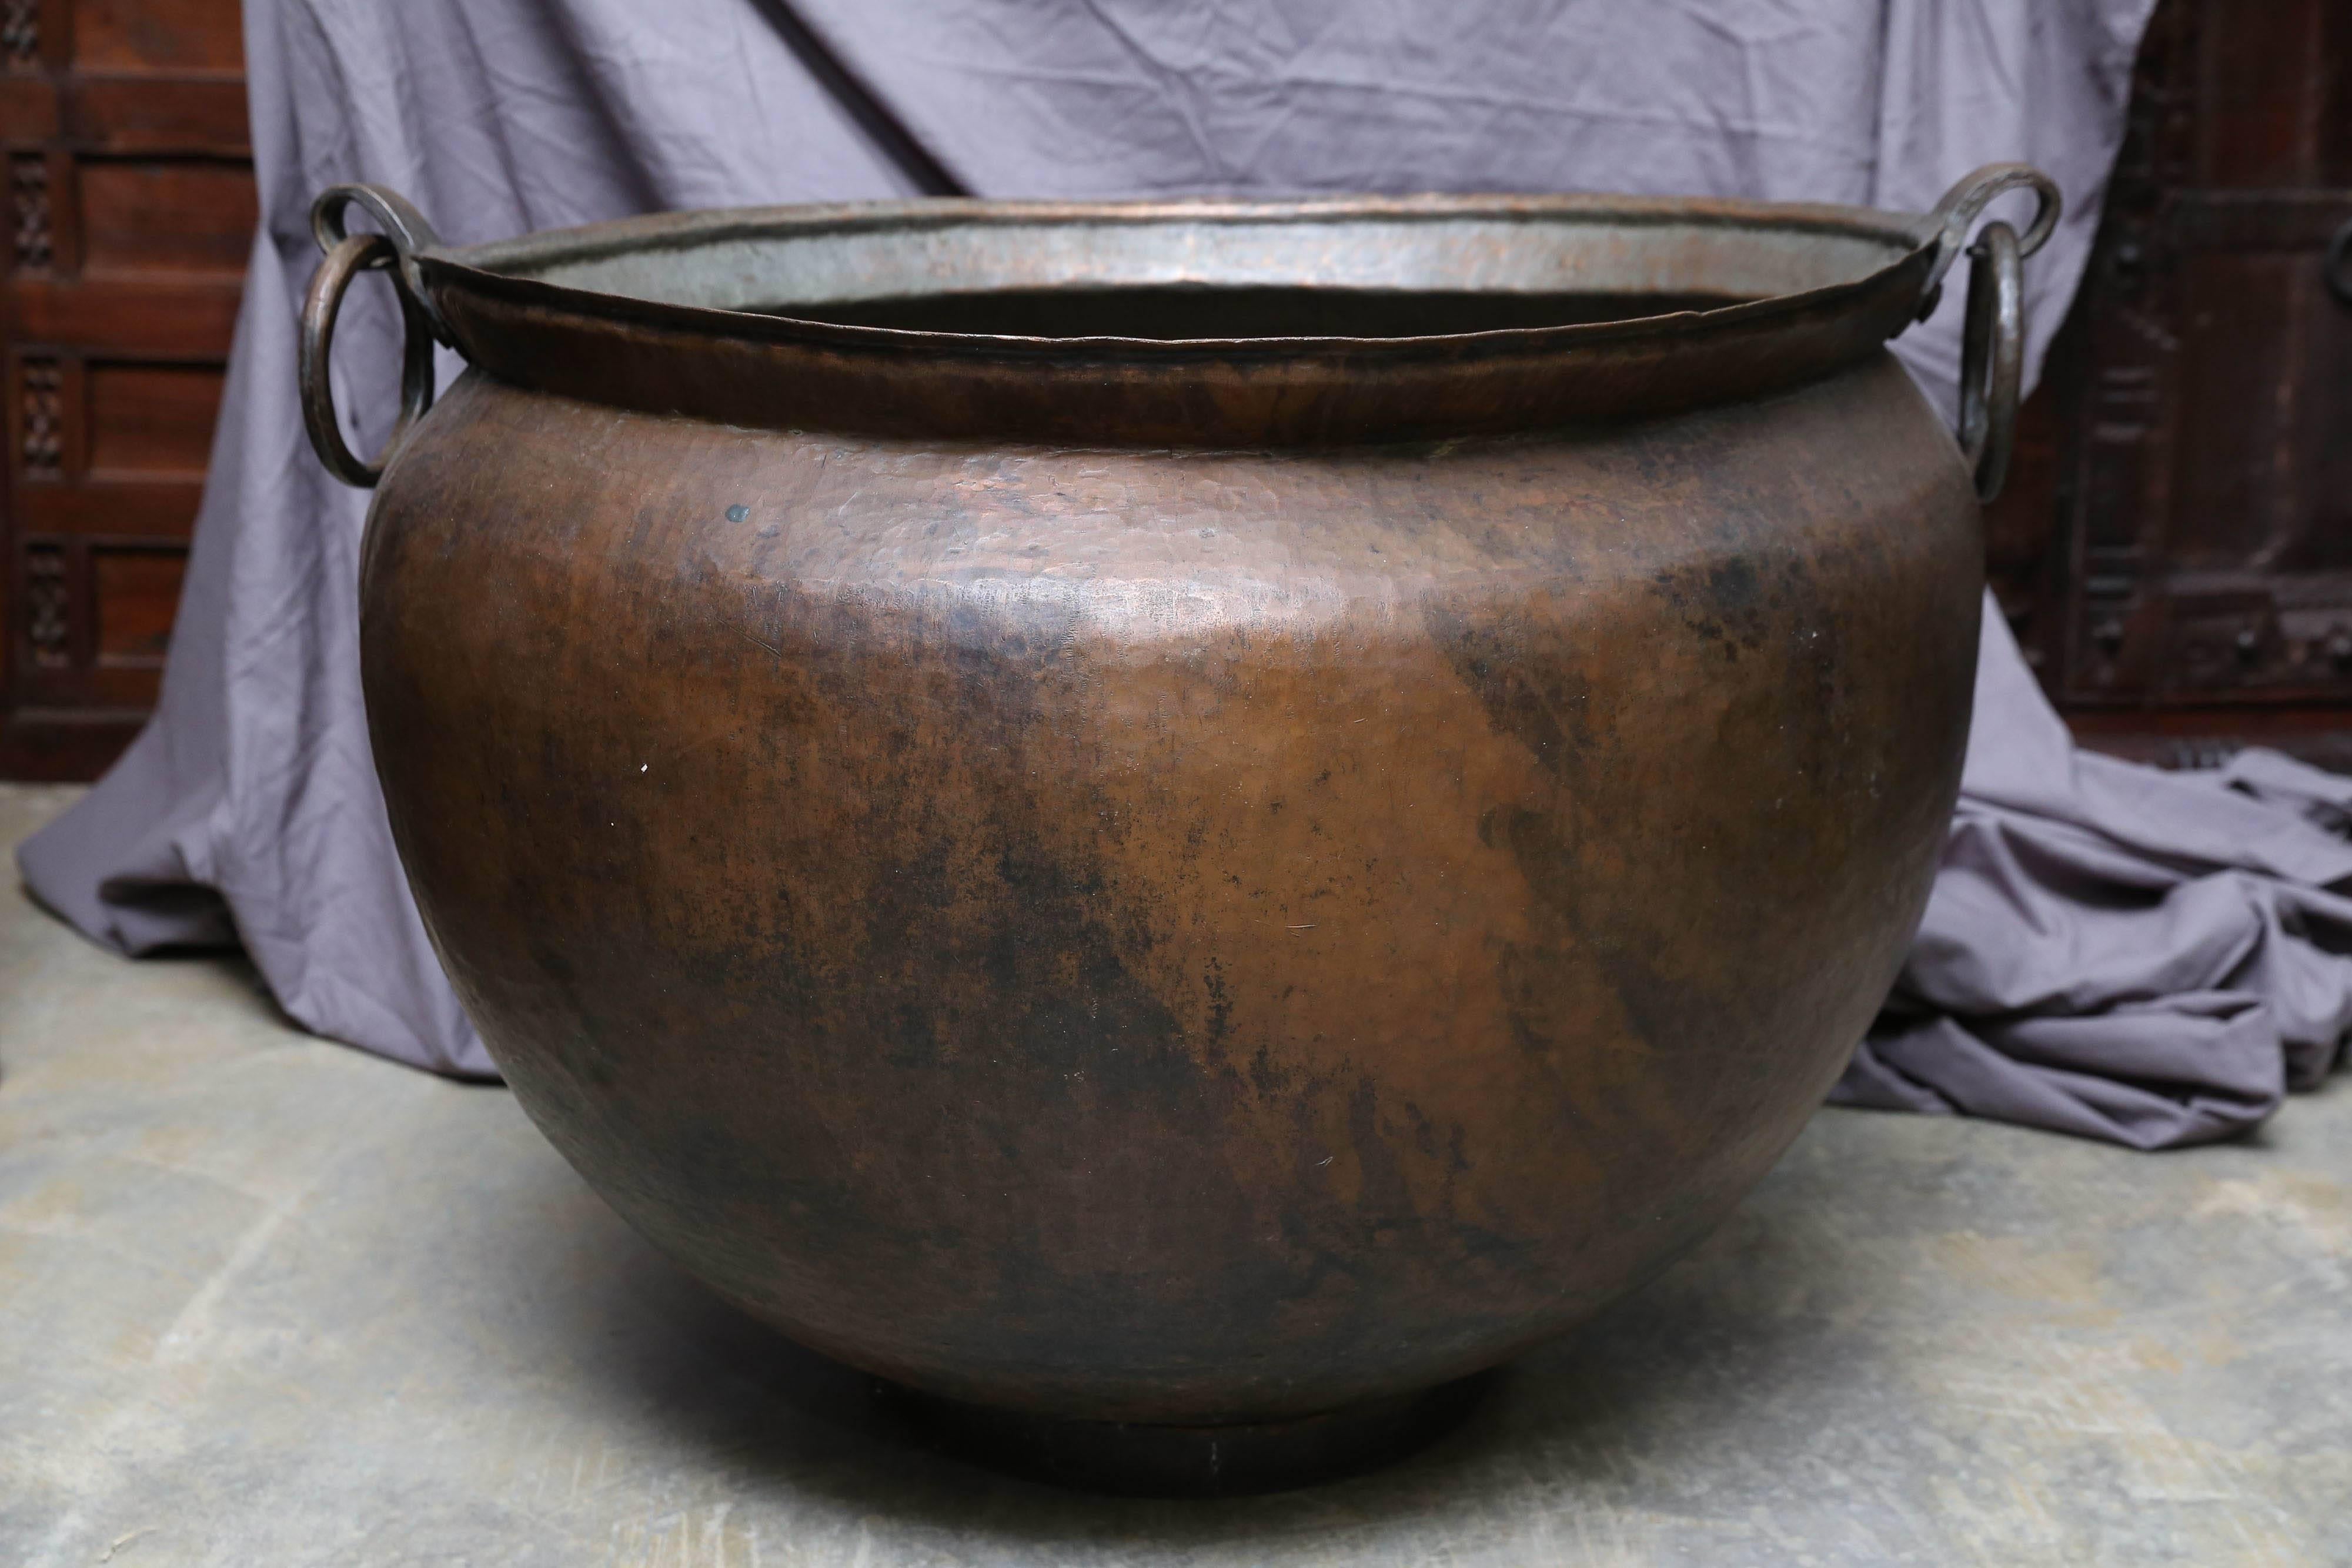 This large copper alloy vessel was used for cooking food for devotees who come to the temple for worship.
The food was prepared by burning firewood on makeshift oven. This large vessel was made by hammering thick copper alloy sheet and hand welding